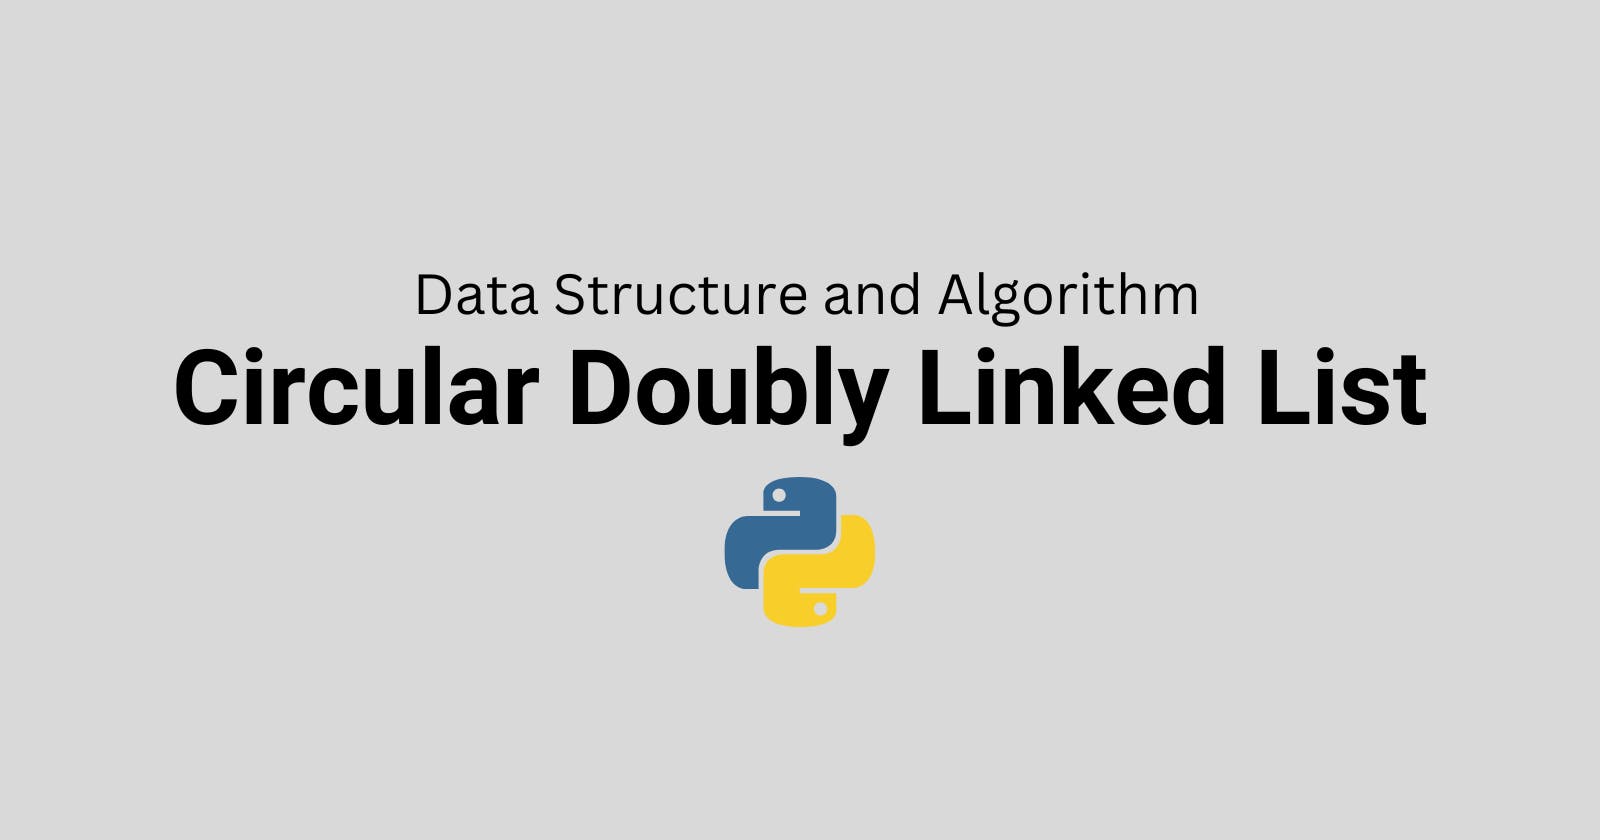 What is a Circular Doubly Linked List?